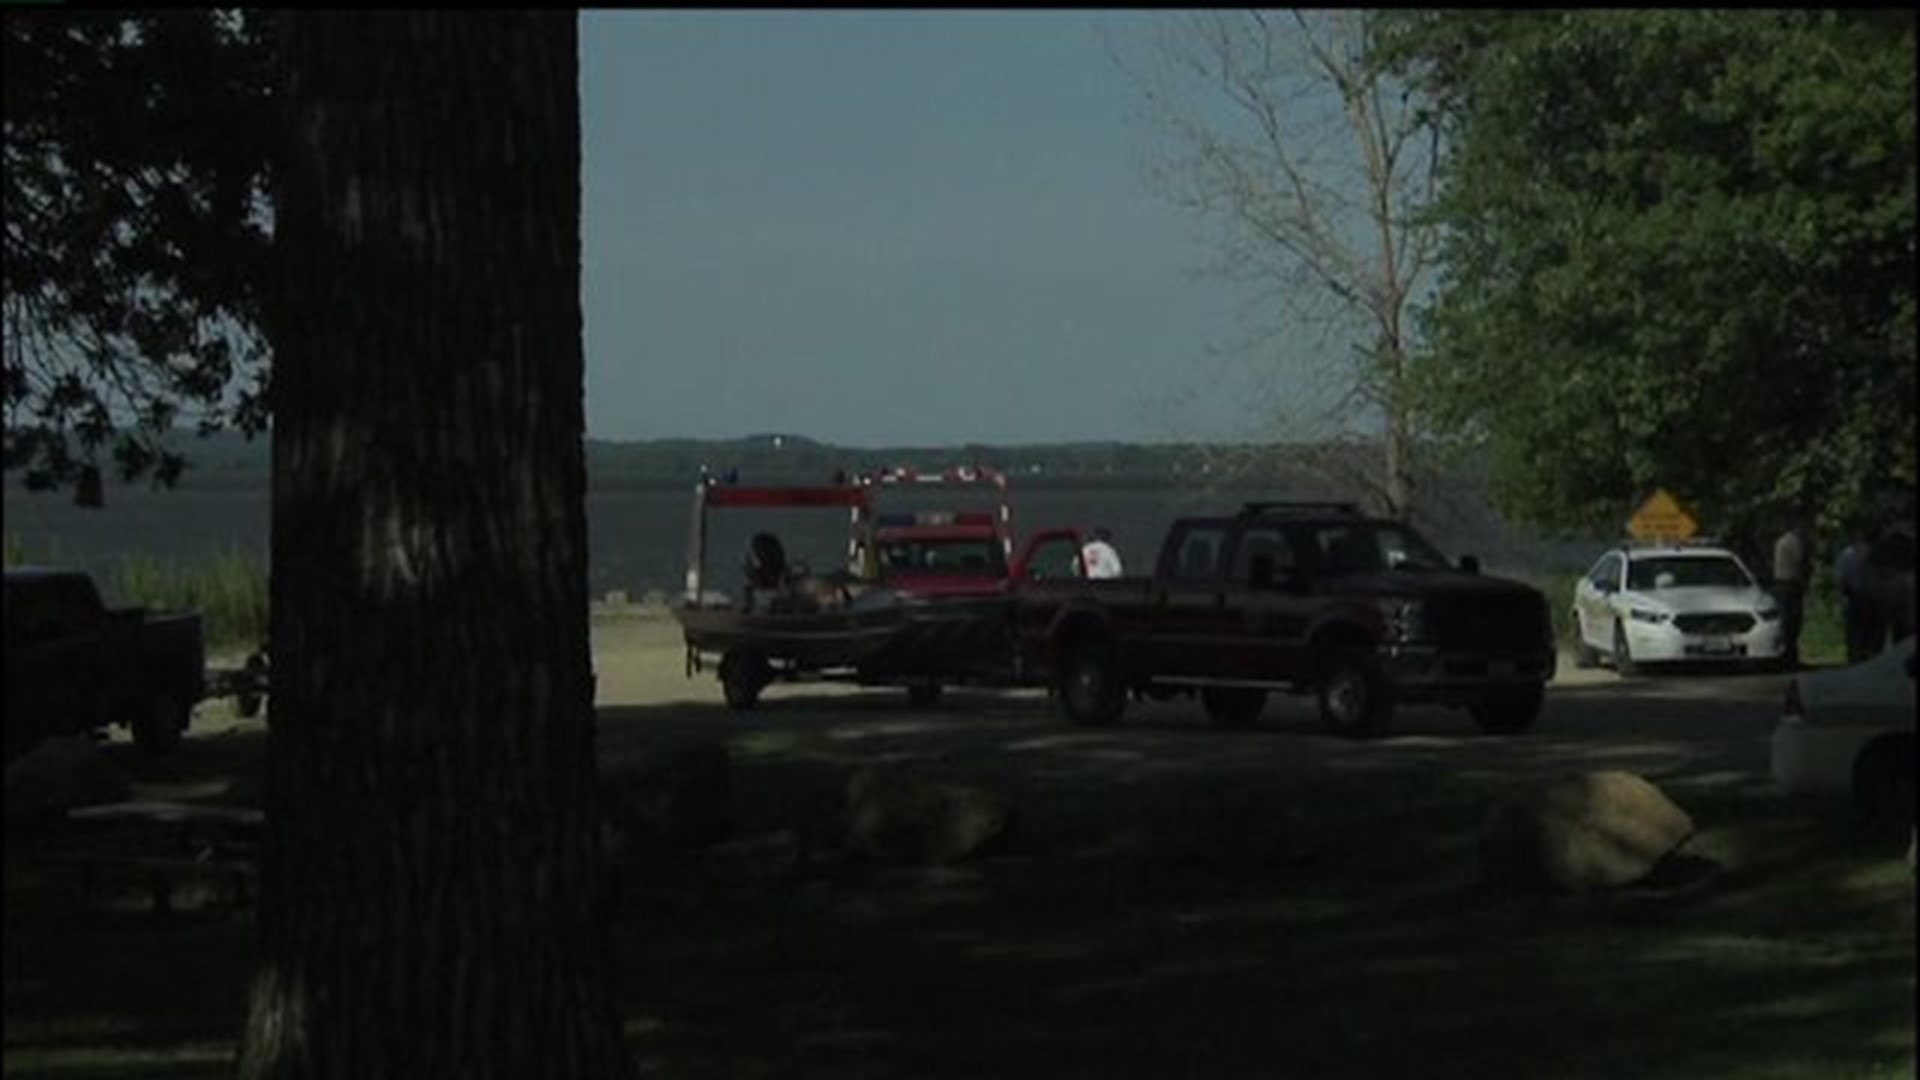 Search efforts called-off due to conditions in Clinton County